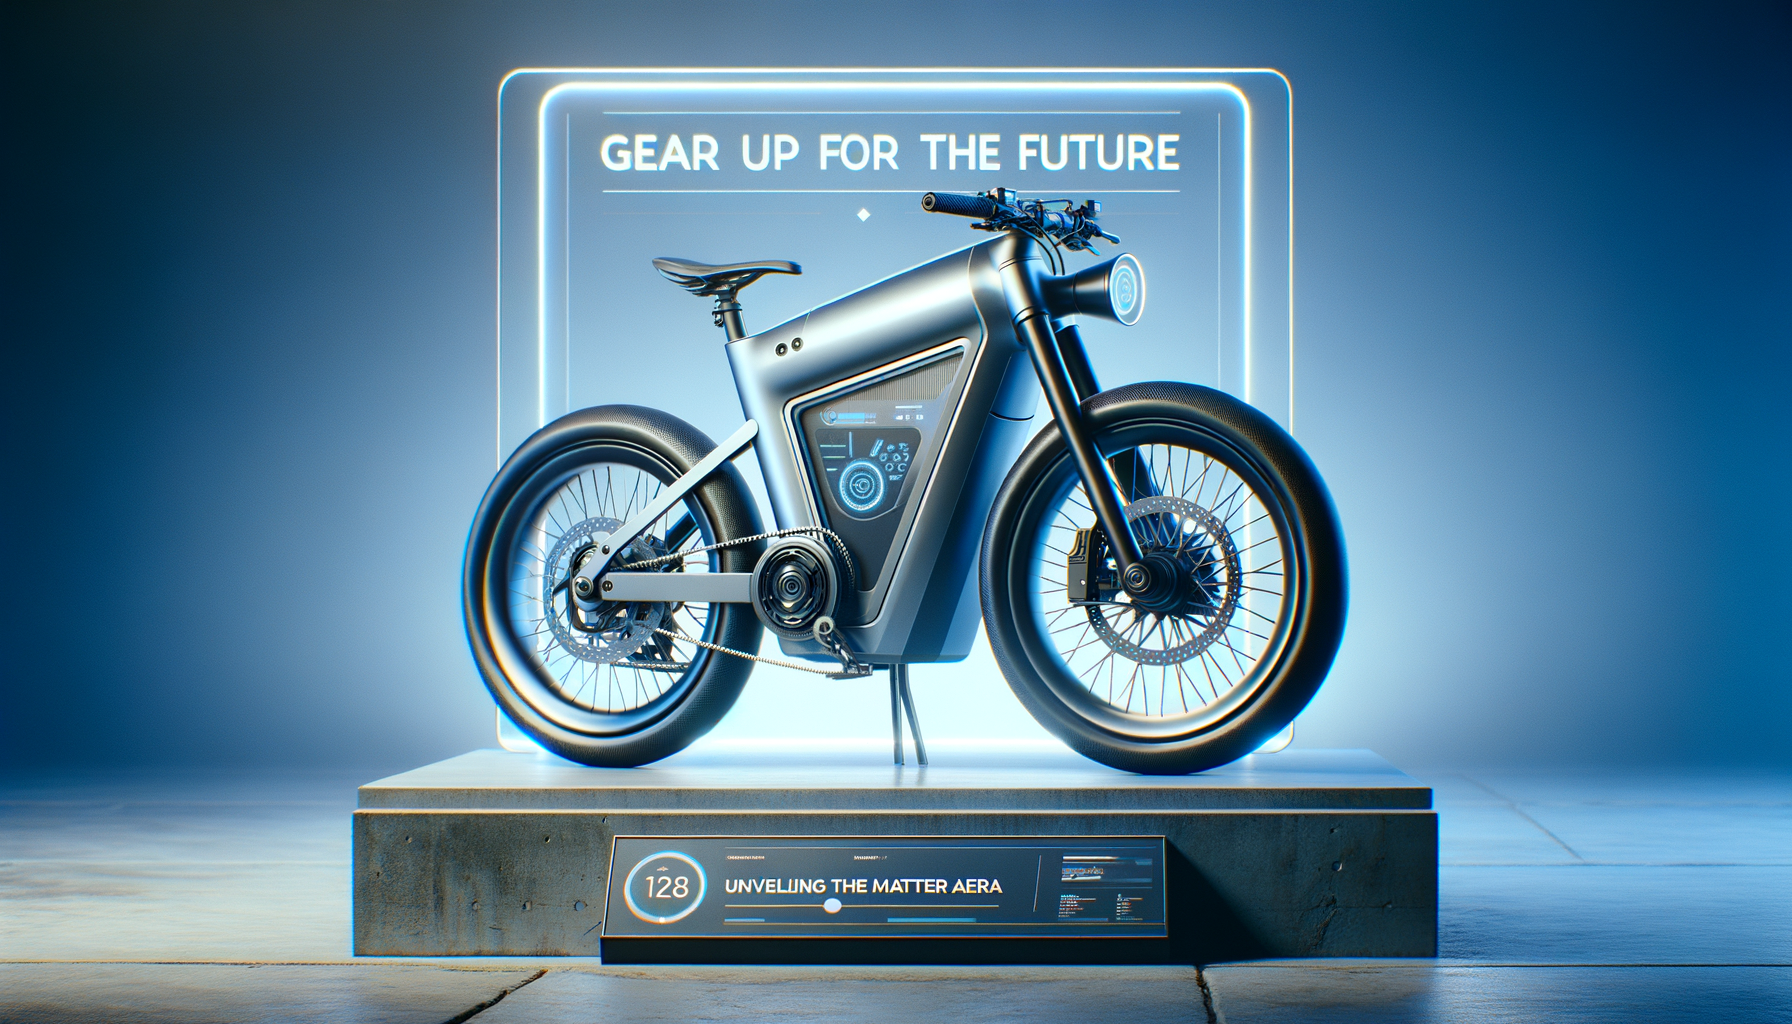 gear up for the future with the unveiling of the matter aera electric bike, a cutting-edge innovation that promises an exhilarating ride and sustainable transportation solution.